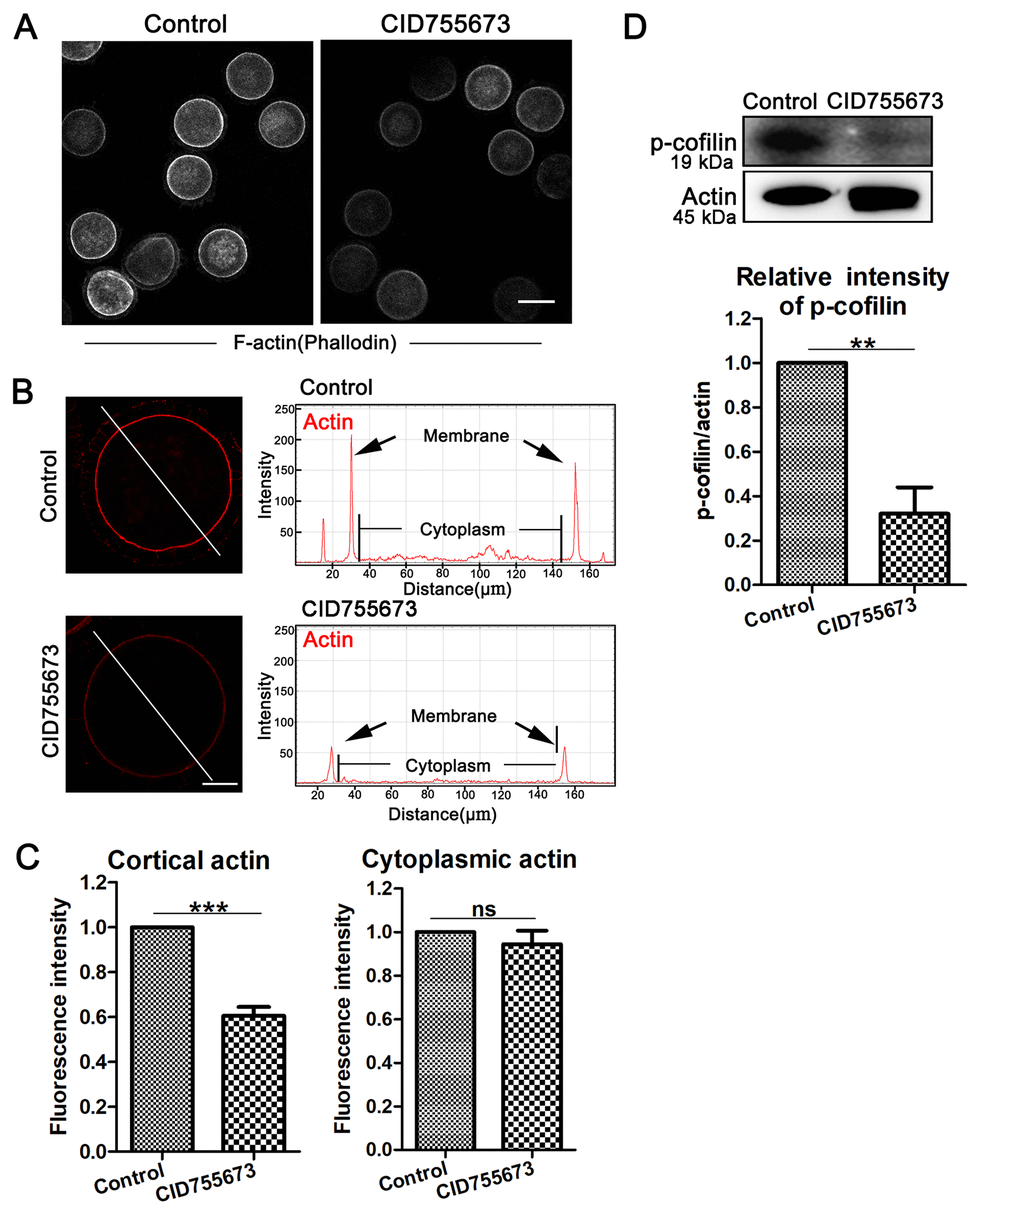 Effects of PKD inhibition on cortical actin assembly and p-cofilin expression during meiosis. (A) Representative images of actin distribution in the control and CID755673 treatment groups. White, actin, bar = 100 µm. (B) Fluorescence intensity profiling of actin in the left graphs. Lines in the same direction were drawn through the oocytes, and actin intensities were quantified along these lines. The black arrow in right graphs indicated actin intensity in membrane of oocyte. ZEN Blue Lite software was chosen to perform the analysis. Red, actin, bar = 30 μm. (C) Quantification immunofluorescence intensity levels of actin at the cortex and in the cytoplasm in the control and CID755673 treatment oocytes. Fluorescence intensities were analyzed using ImageJ software. (D) Protein levels of p-cofilin in control and CID755673 treatment oocytes were determined by western blotting. Data are presented as mean ± s.d. from at least three independent experiments. **, significant difference (P P 